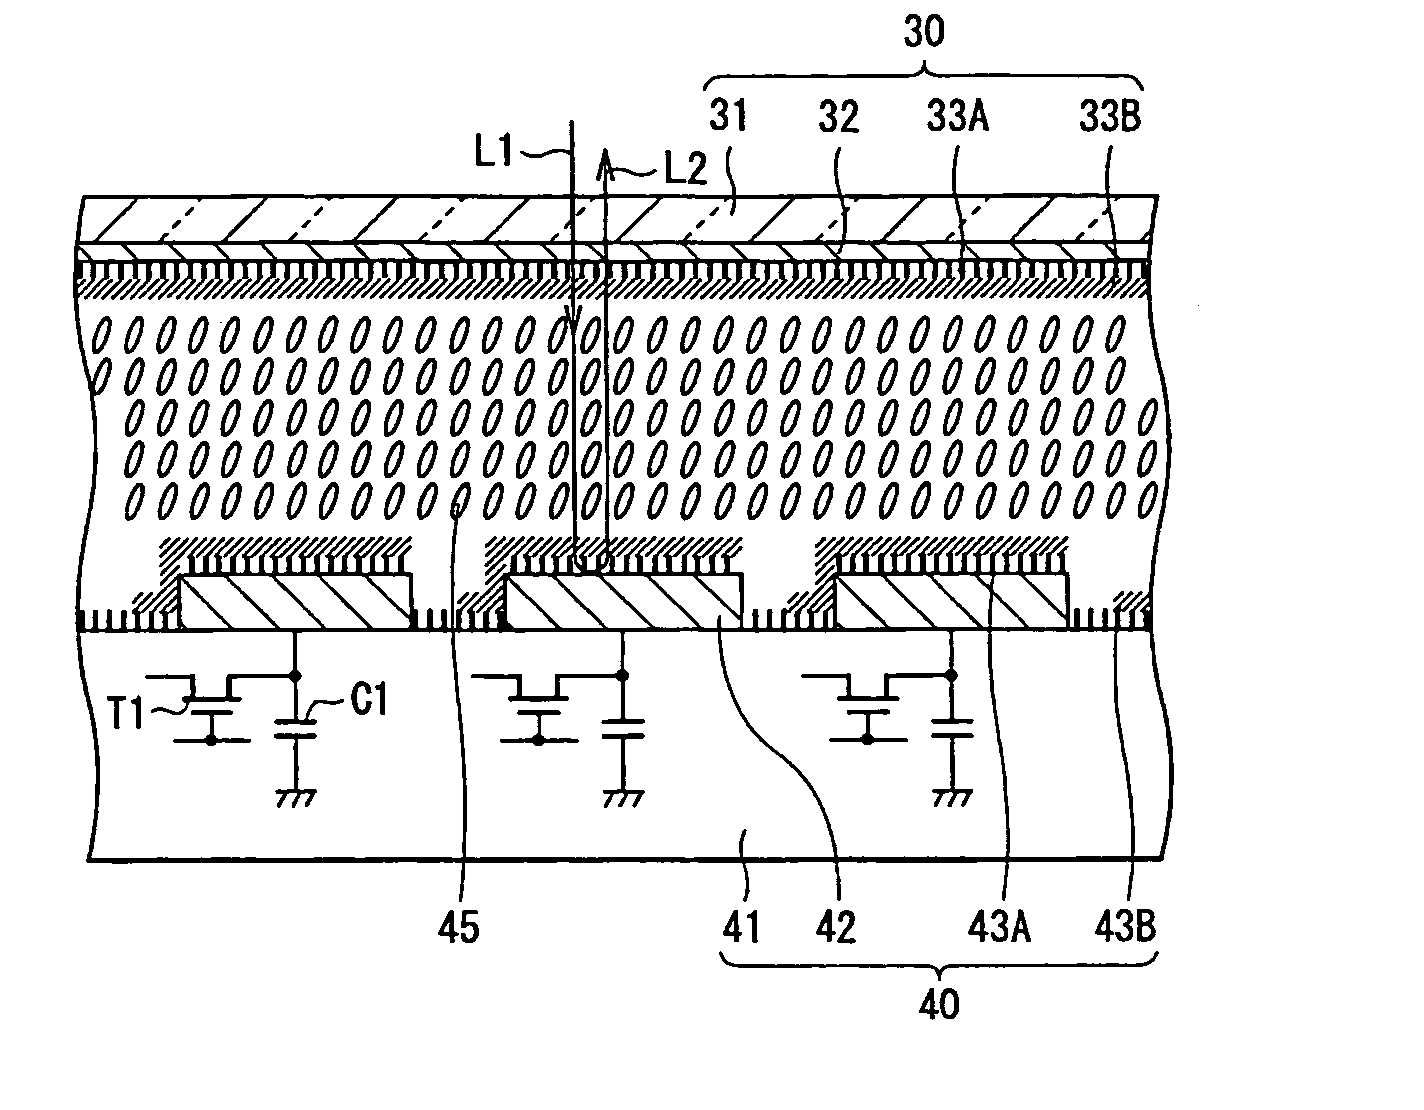 Reflective liquid crystal display device, method of manufacturing the same, and liquid crystal display unit